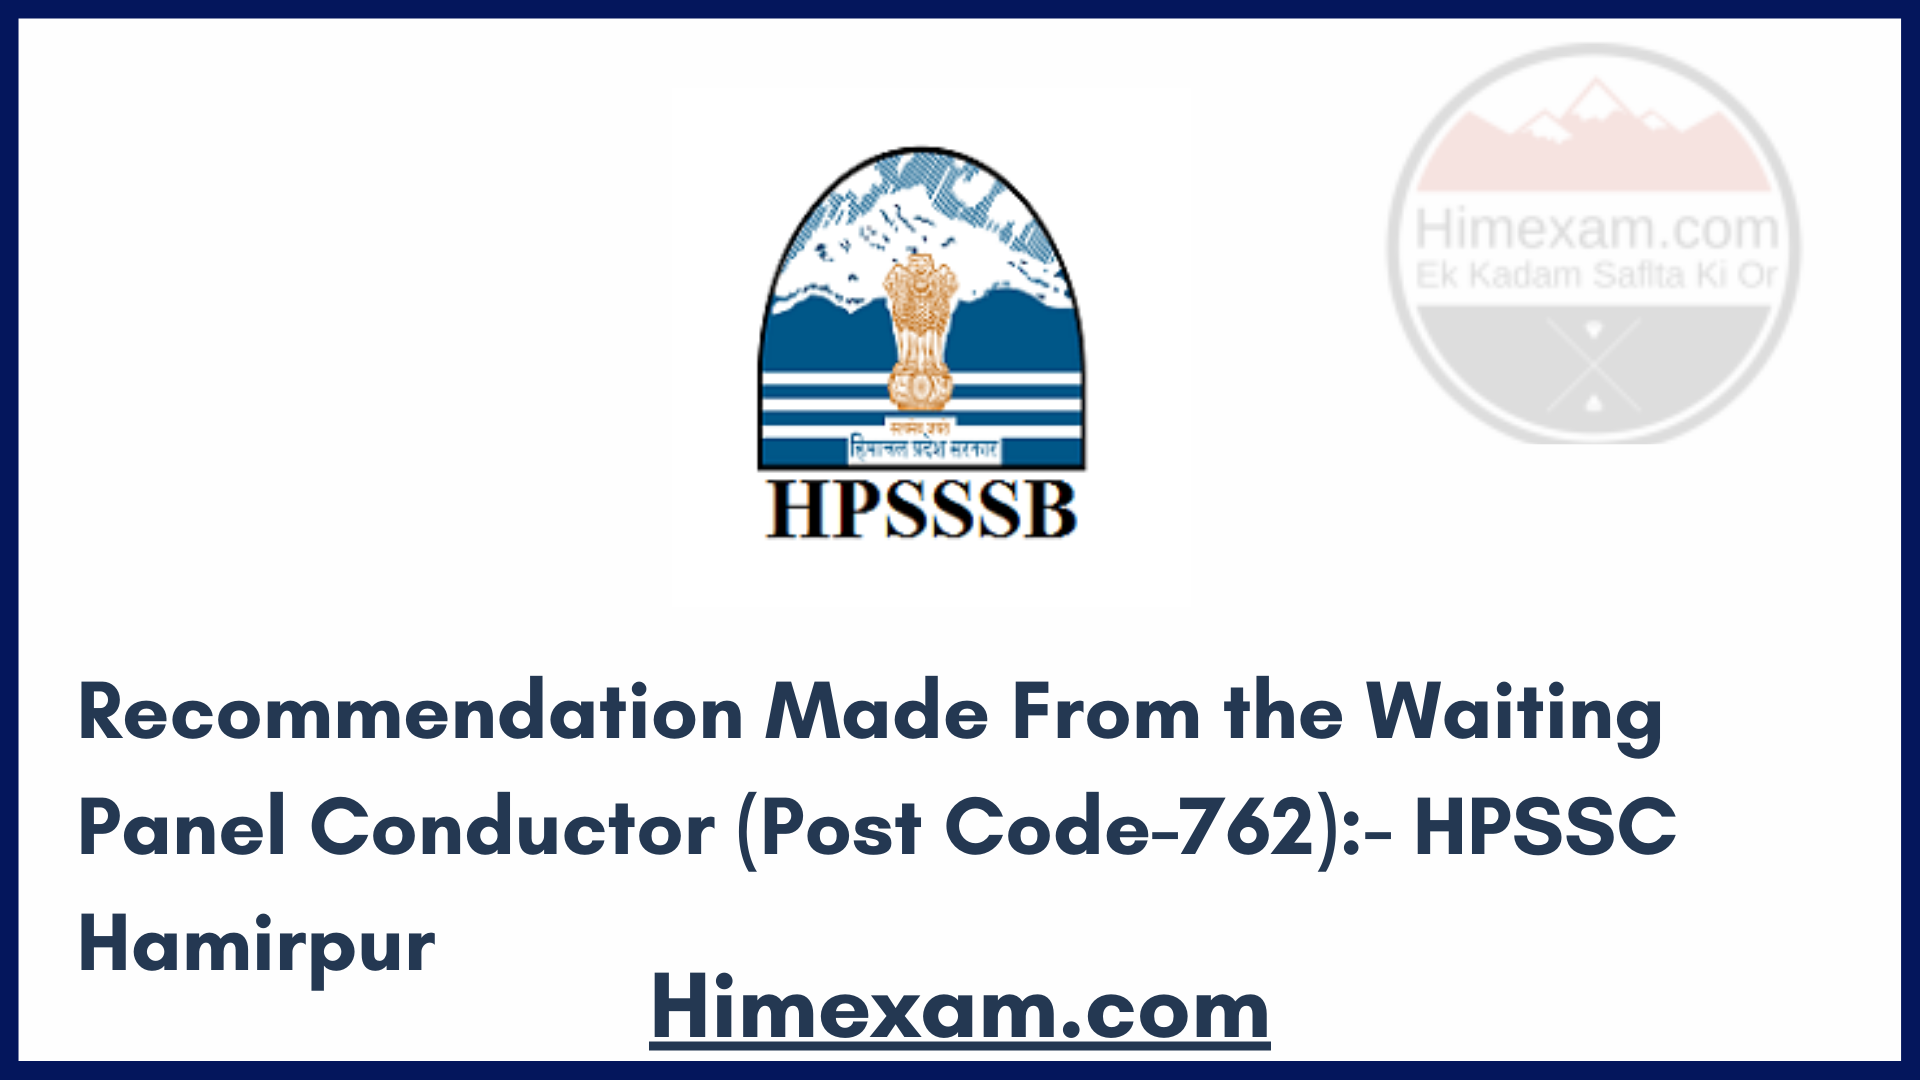 Recommendation Made From the Waiting Panel Conductor (Post Code-762):- HPSSC Hamirpur